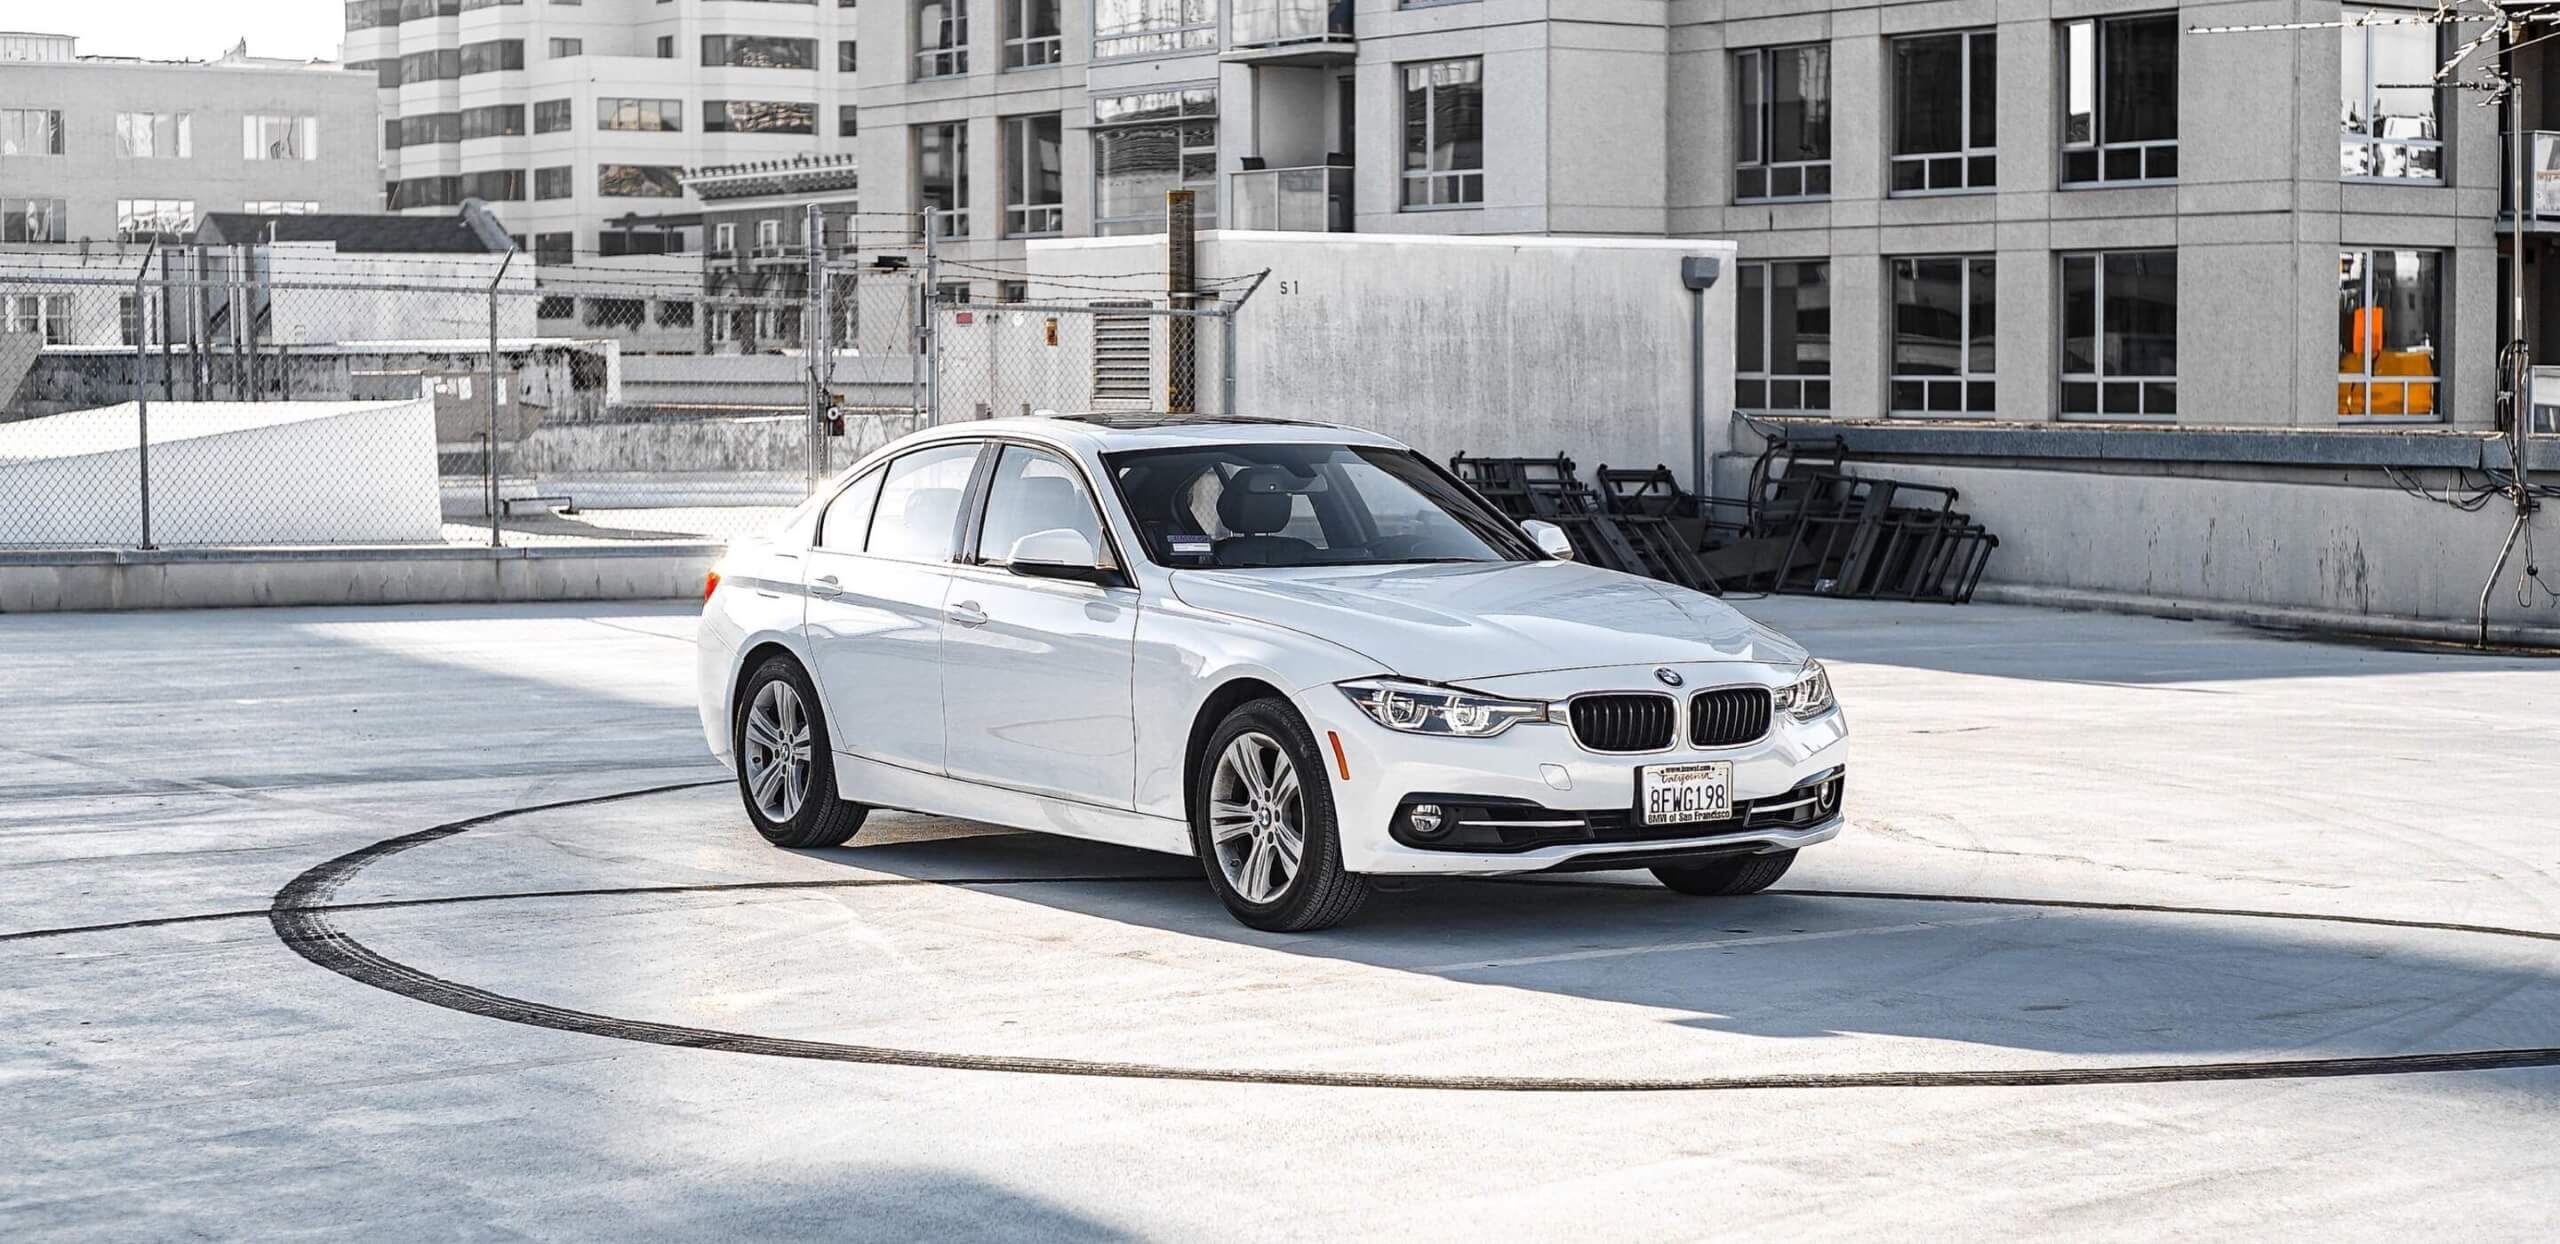 2018-bmw-3-series-white-featured-image